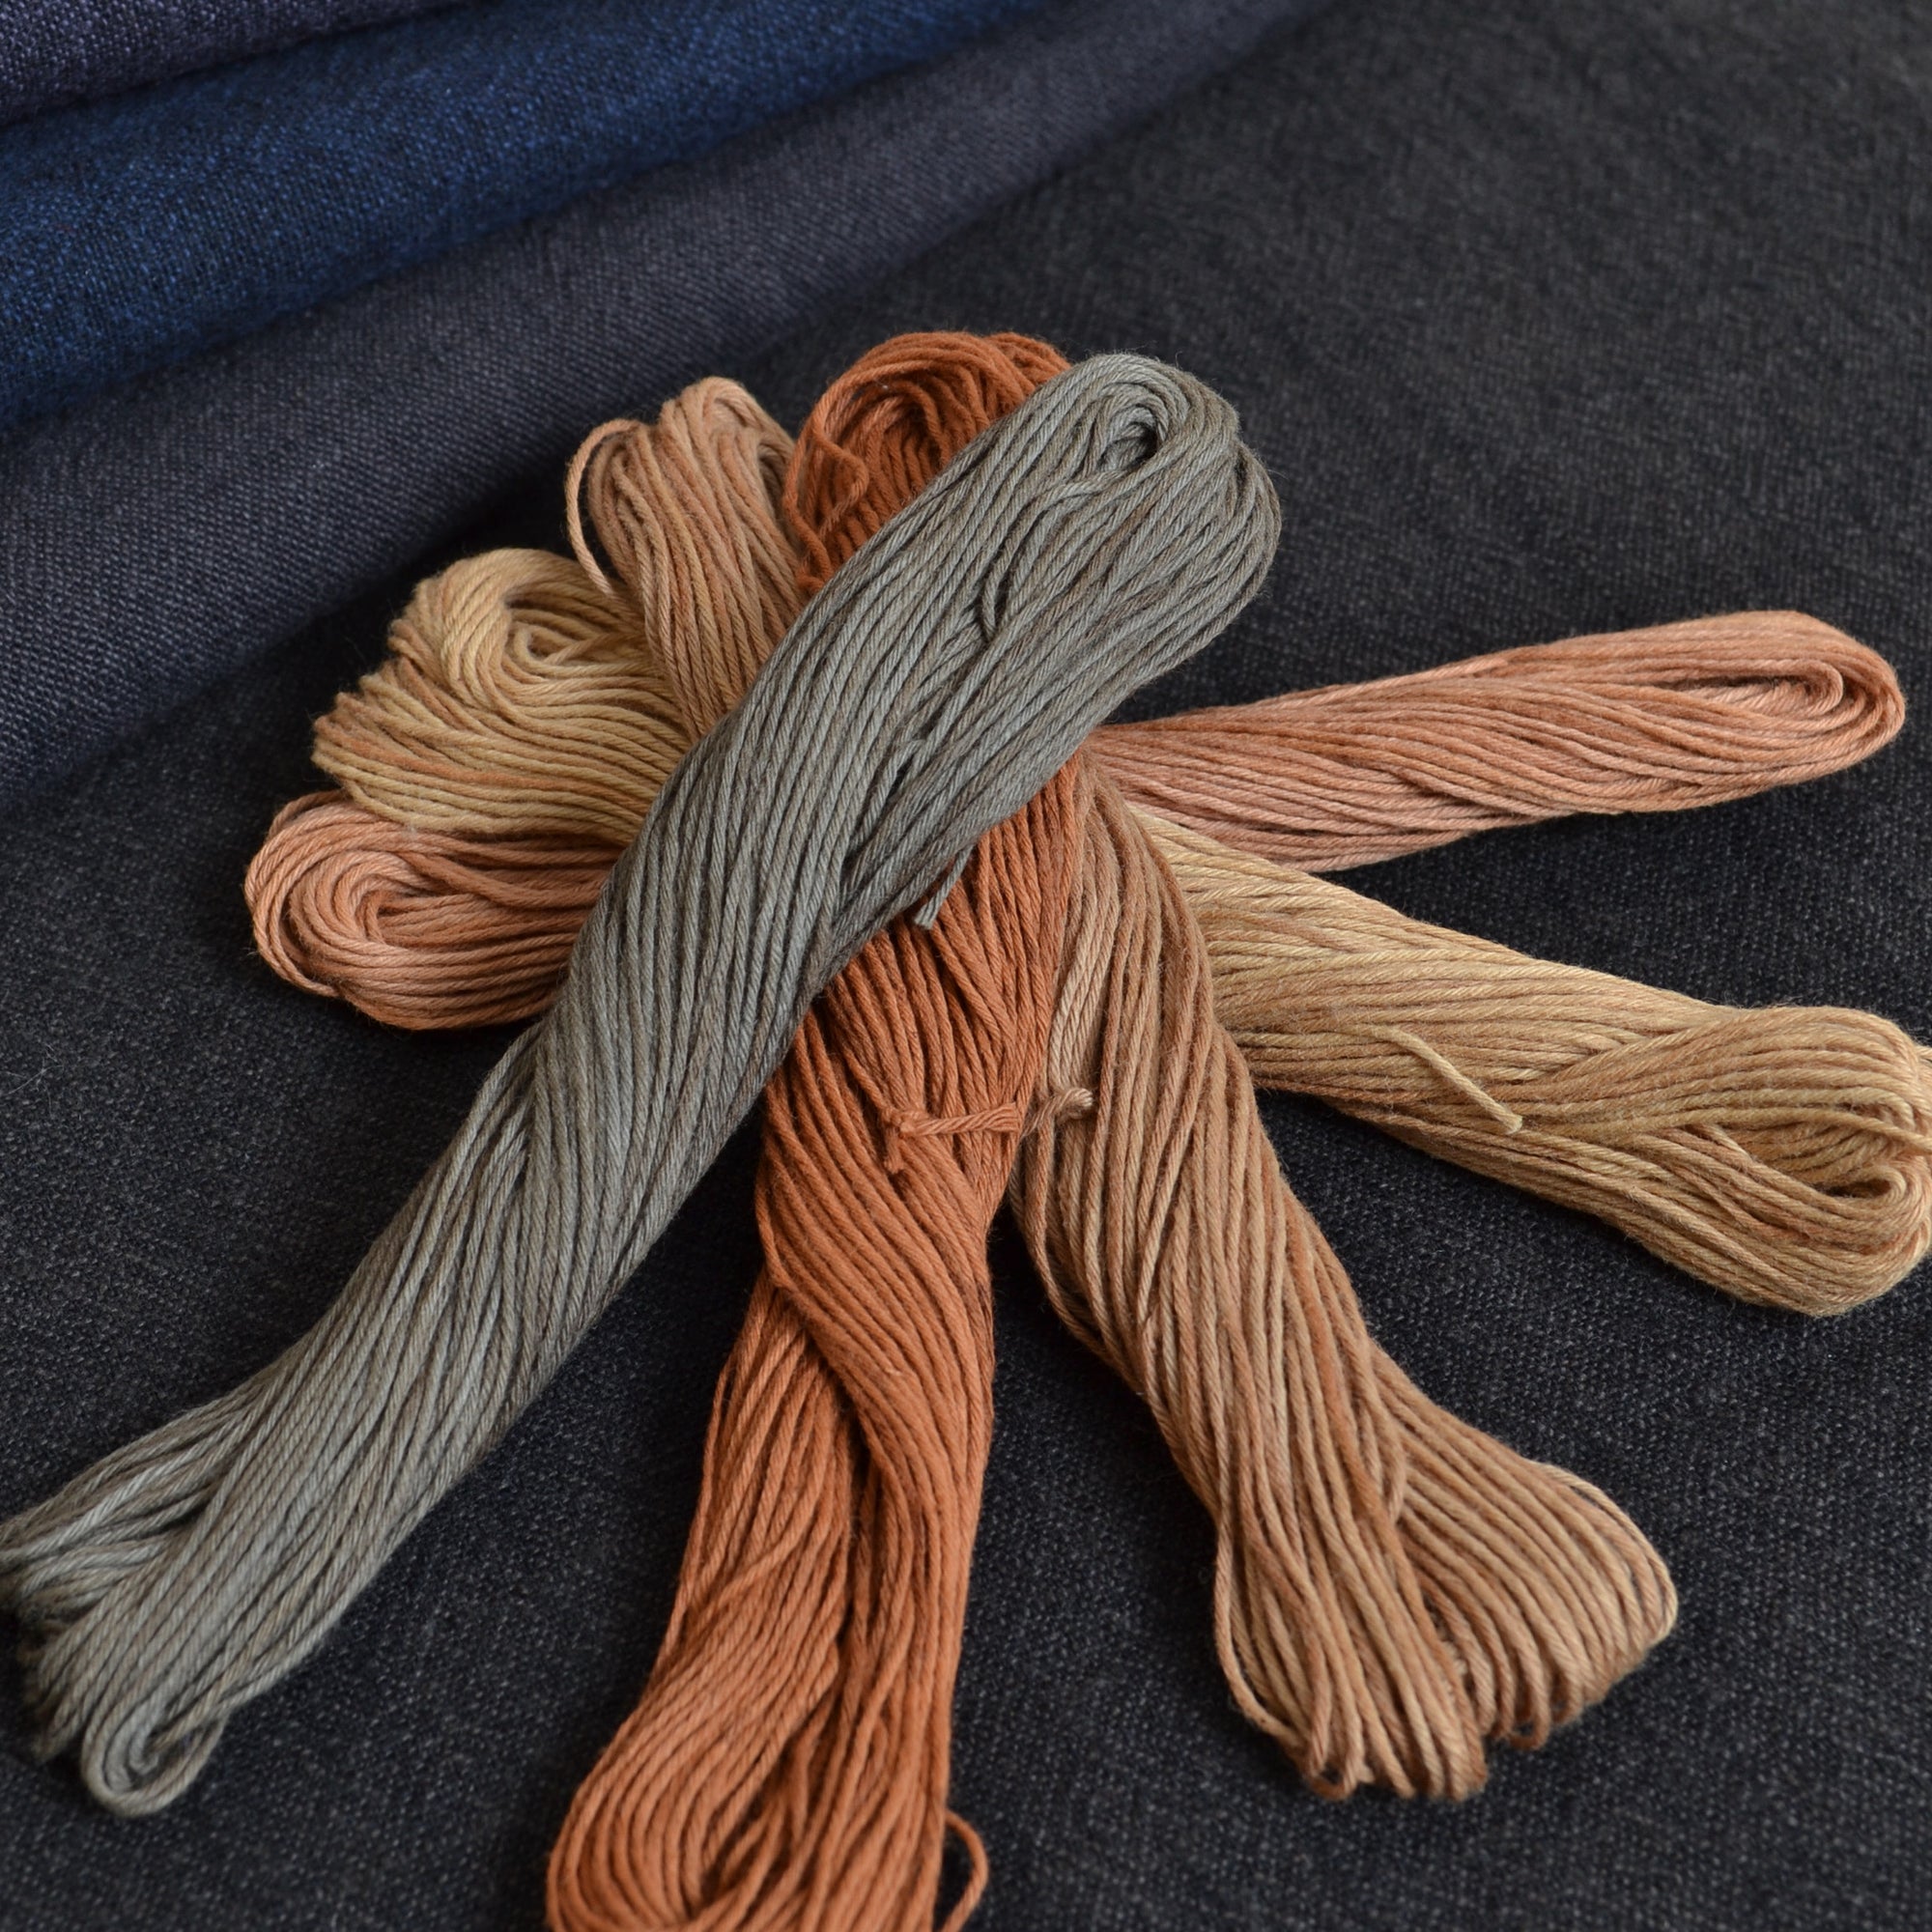 Fujix Persimmon tannin dyed cotton threads